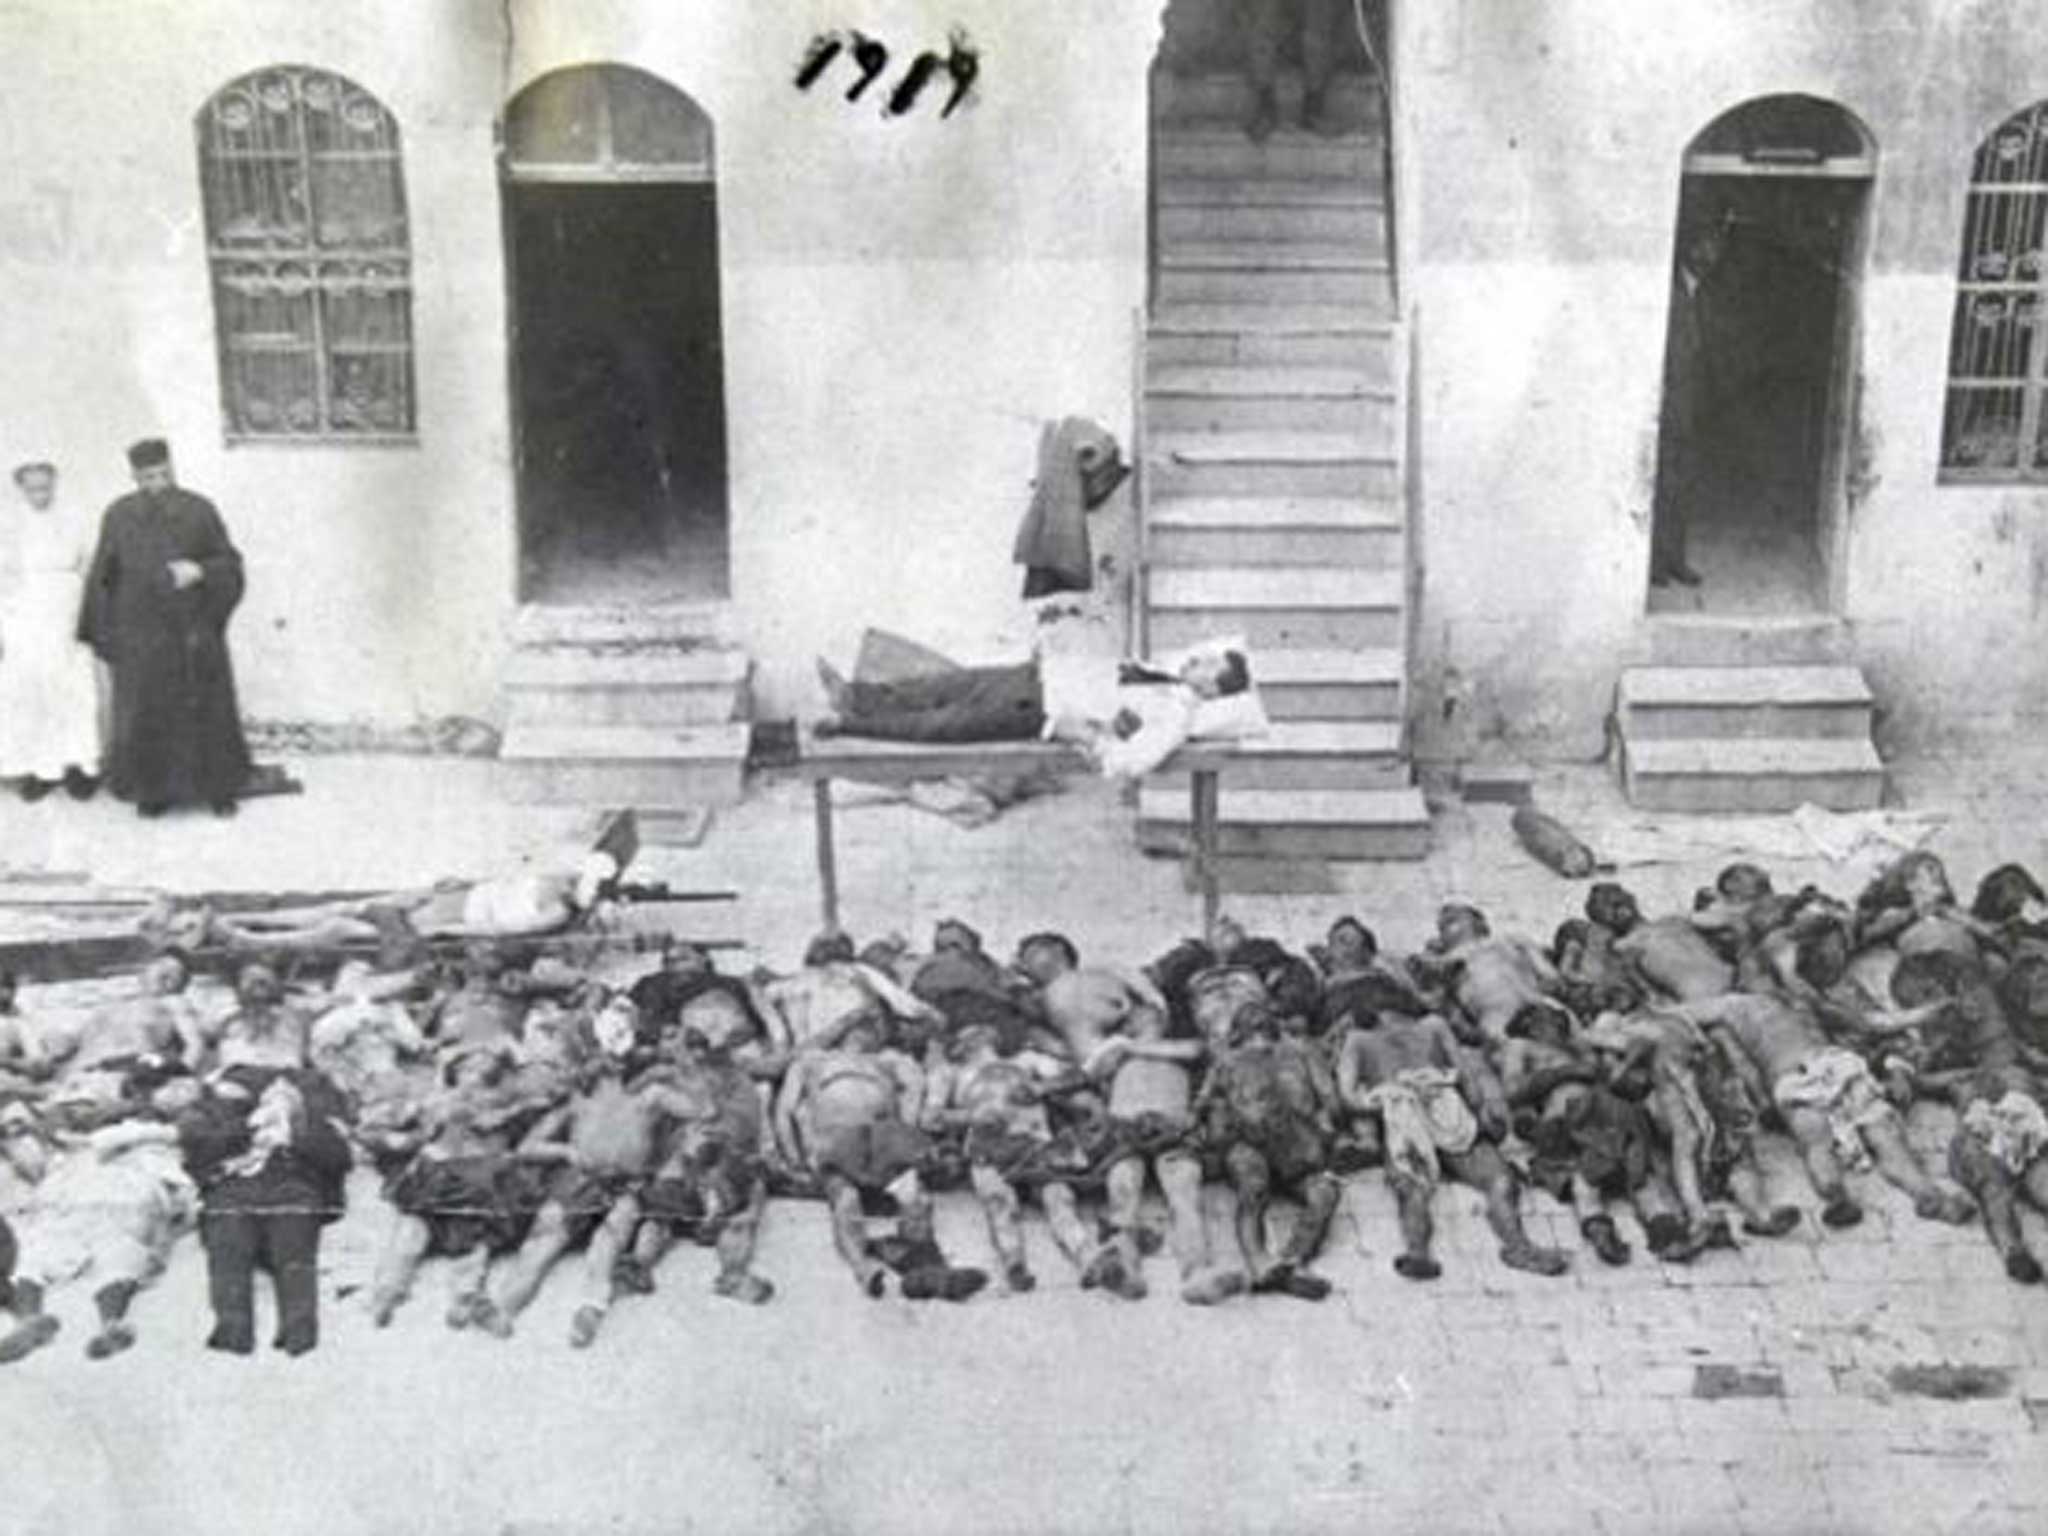 Images of a genocide: Victims of the ‘Great Slaughter'